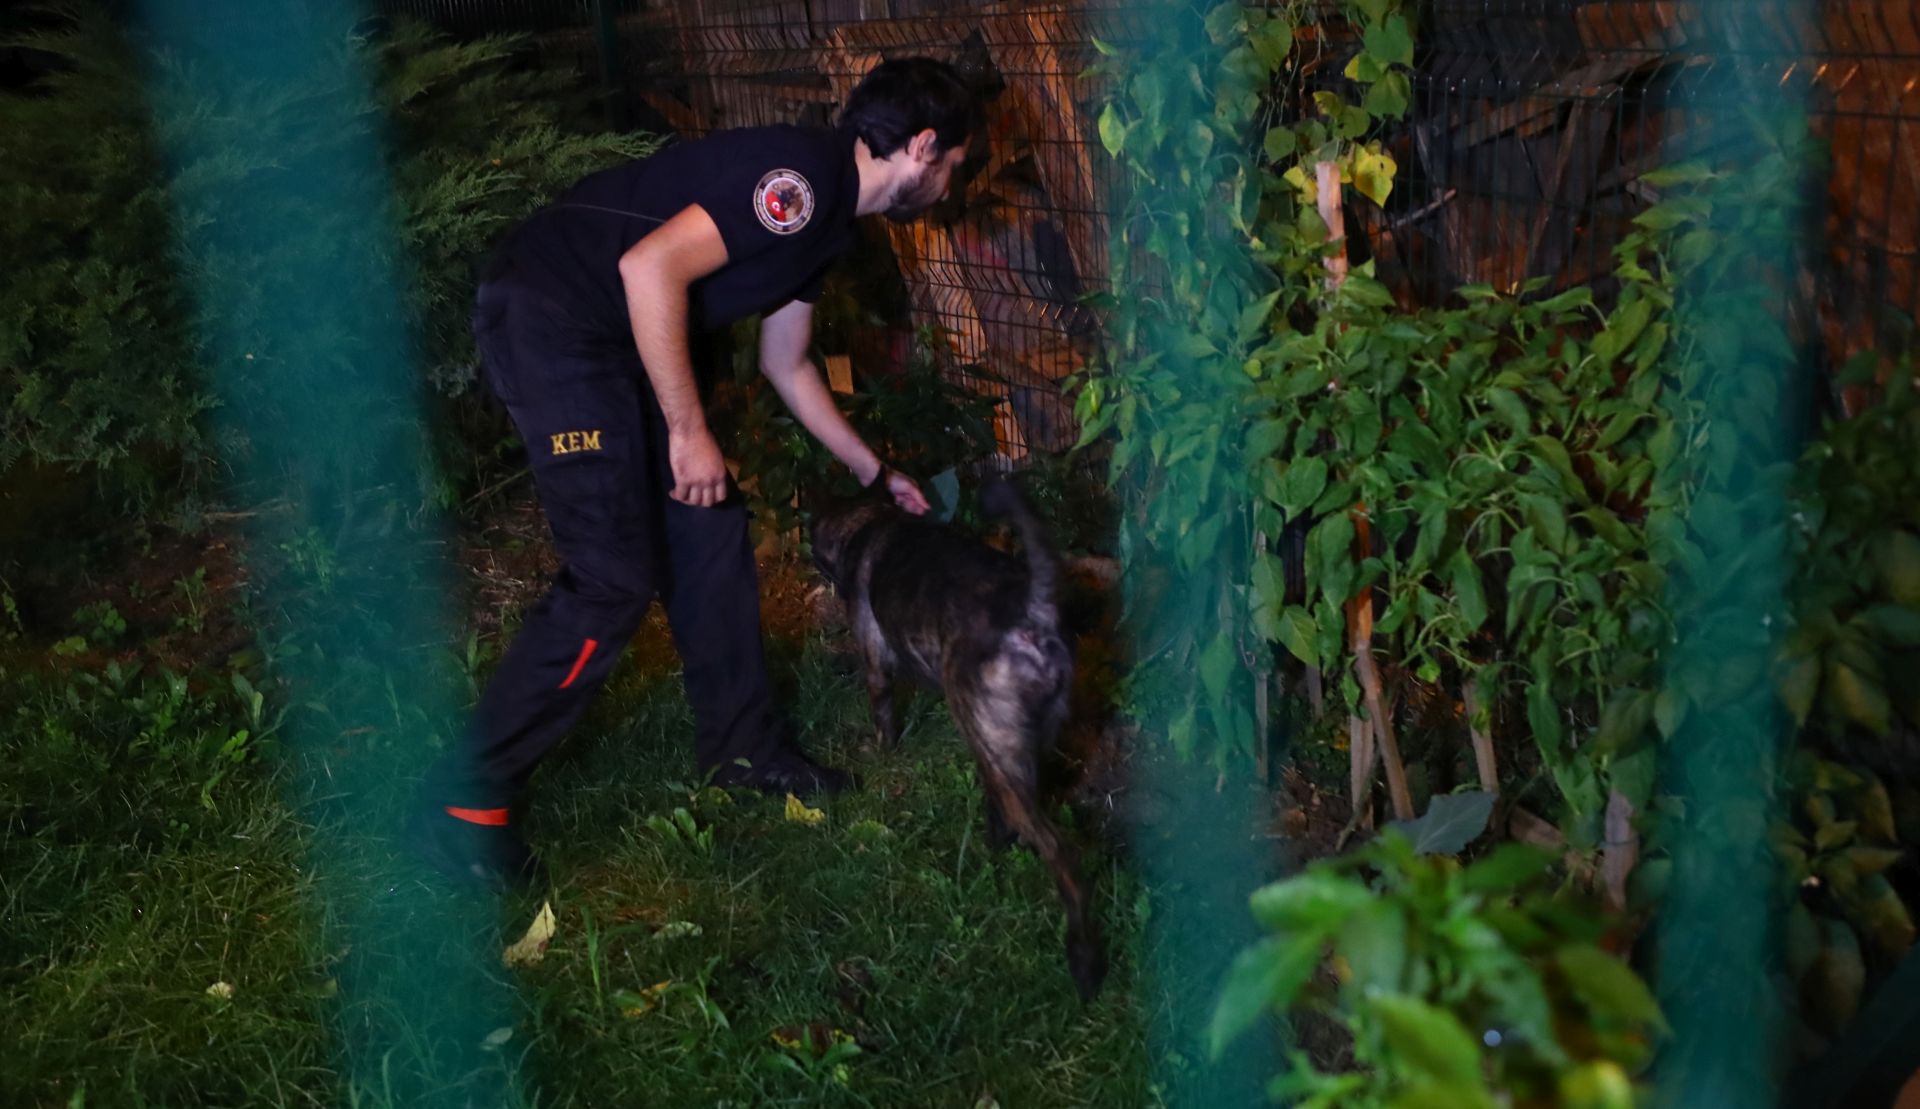 epa07101097 Turkish forensic police officers use search and rescue dog for investigation at the back yard of the residence of the Saudi consul Mohammed al-Otaibi for investigation in Istanbul, Turkey, early 18 October 2018. According to local media reports, al-Otaibi has left Turkey on 16 October. A Turkish prosecutor on 15 October has entered the Saudi consulate in Istanbul to investigate the disappearance of dissident Saudi journalist Jamal Khashoggi, an inspection that was being carried out jointly with a Saudi team. Khashoggi went missing on 02 October when he entered the Saudi consulate to pick up paperwork.  EPA/SEDAT SUNA  EPA-EFE/SEDAT SUNA